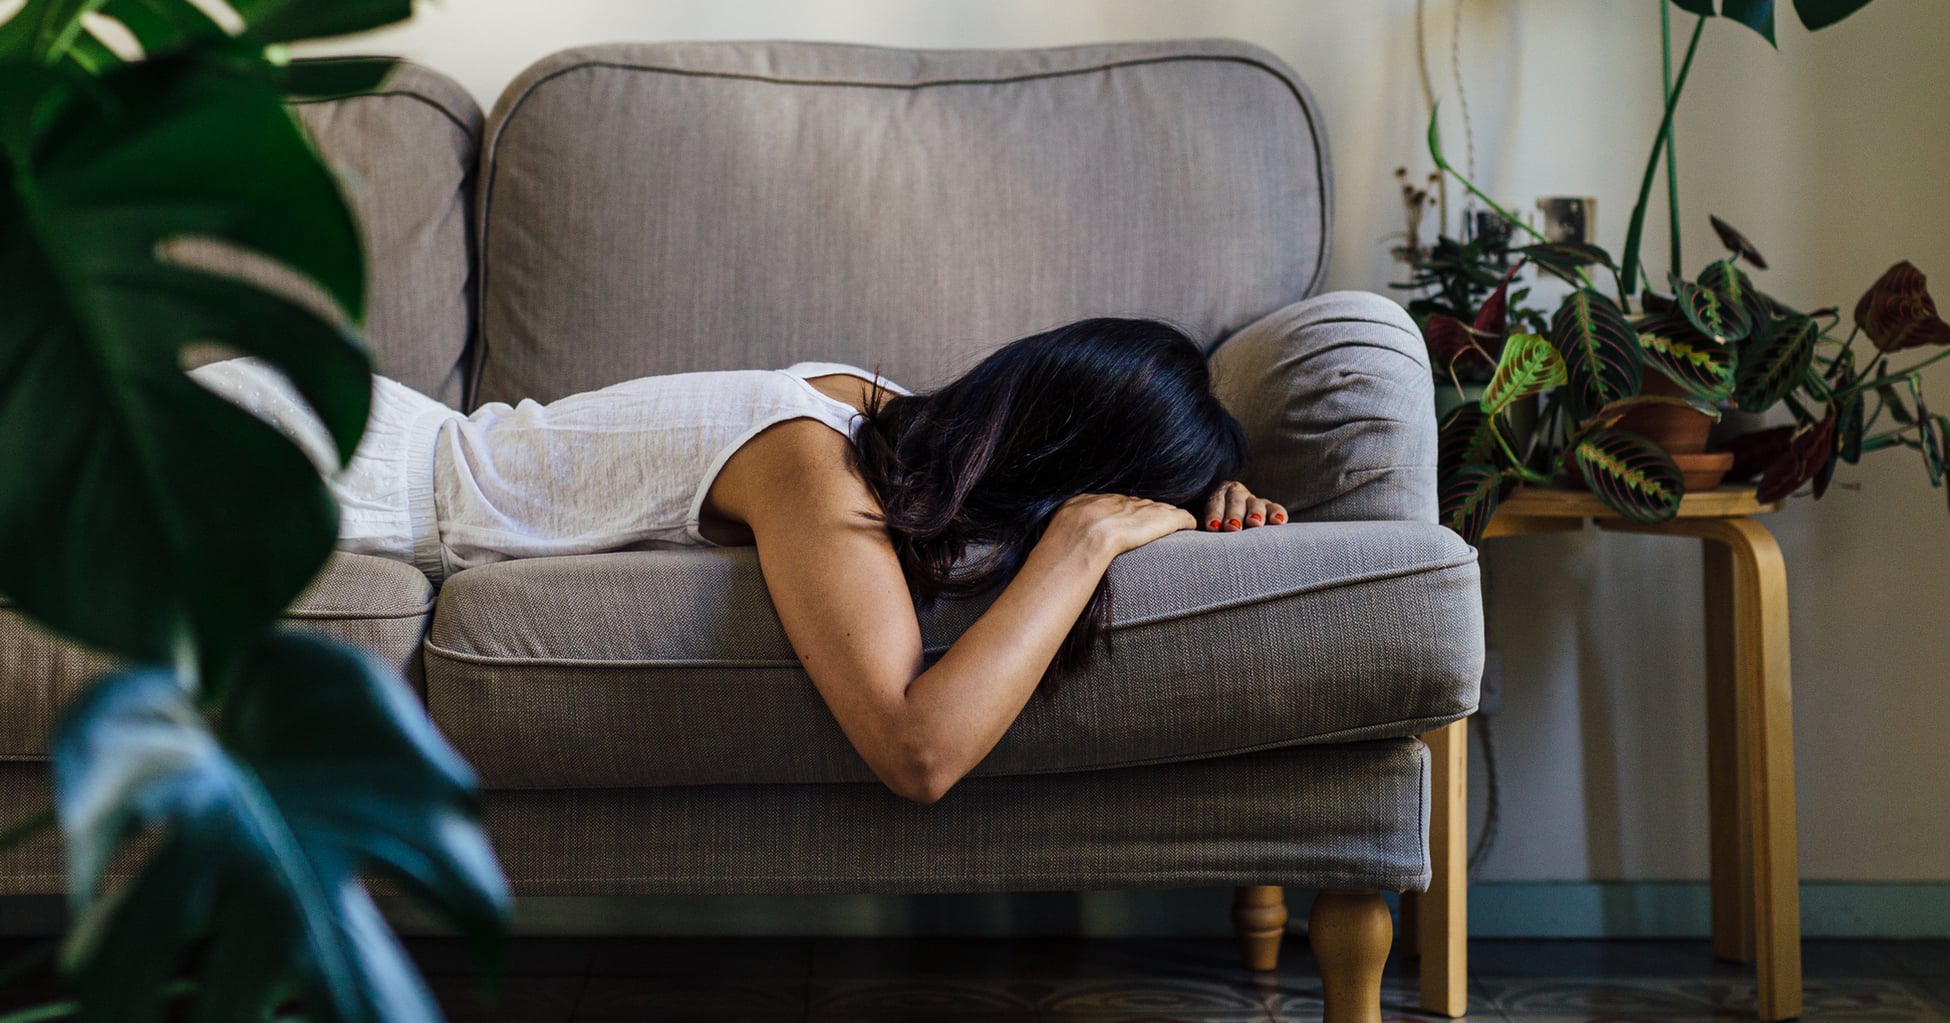 Chronic Fatigue Syndrome Isn’t Just Misunderstood, It’s Actively Neglected